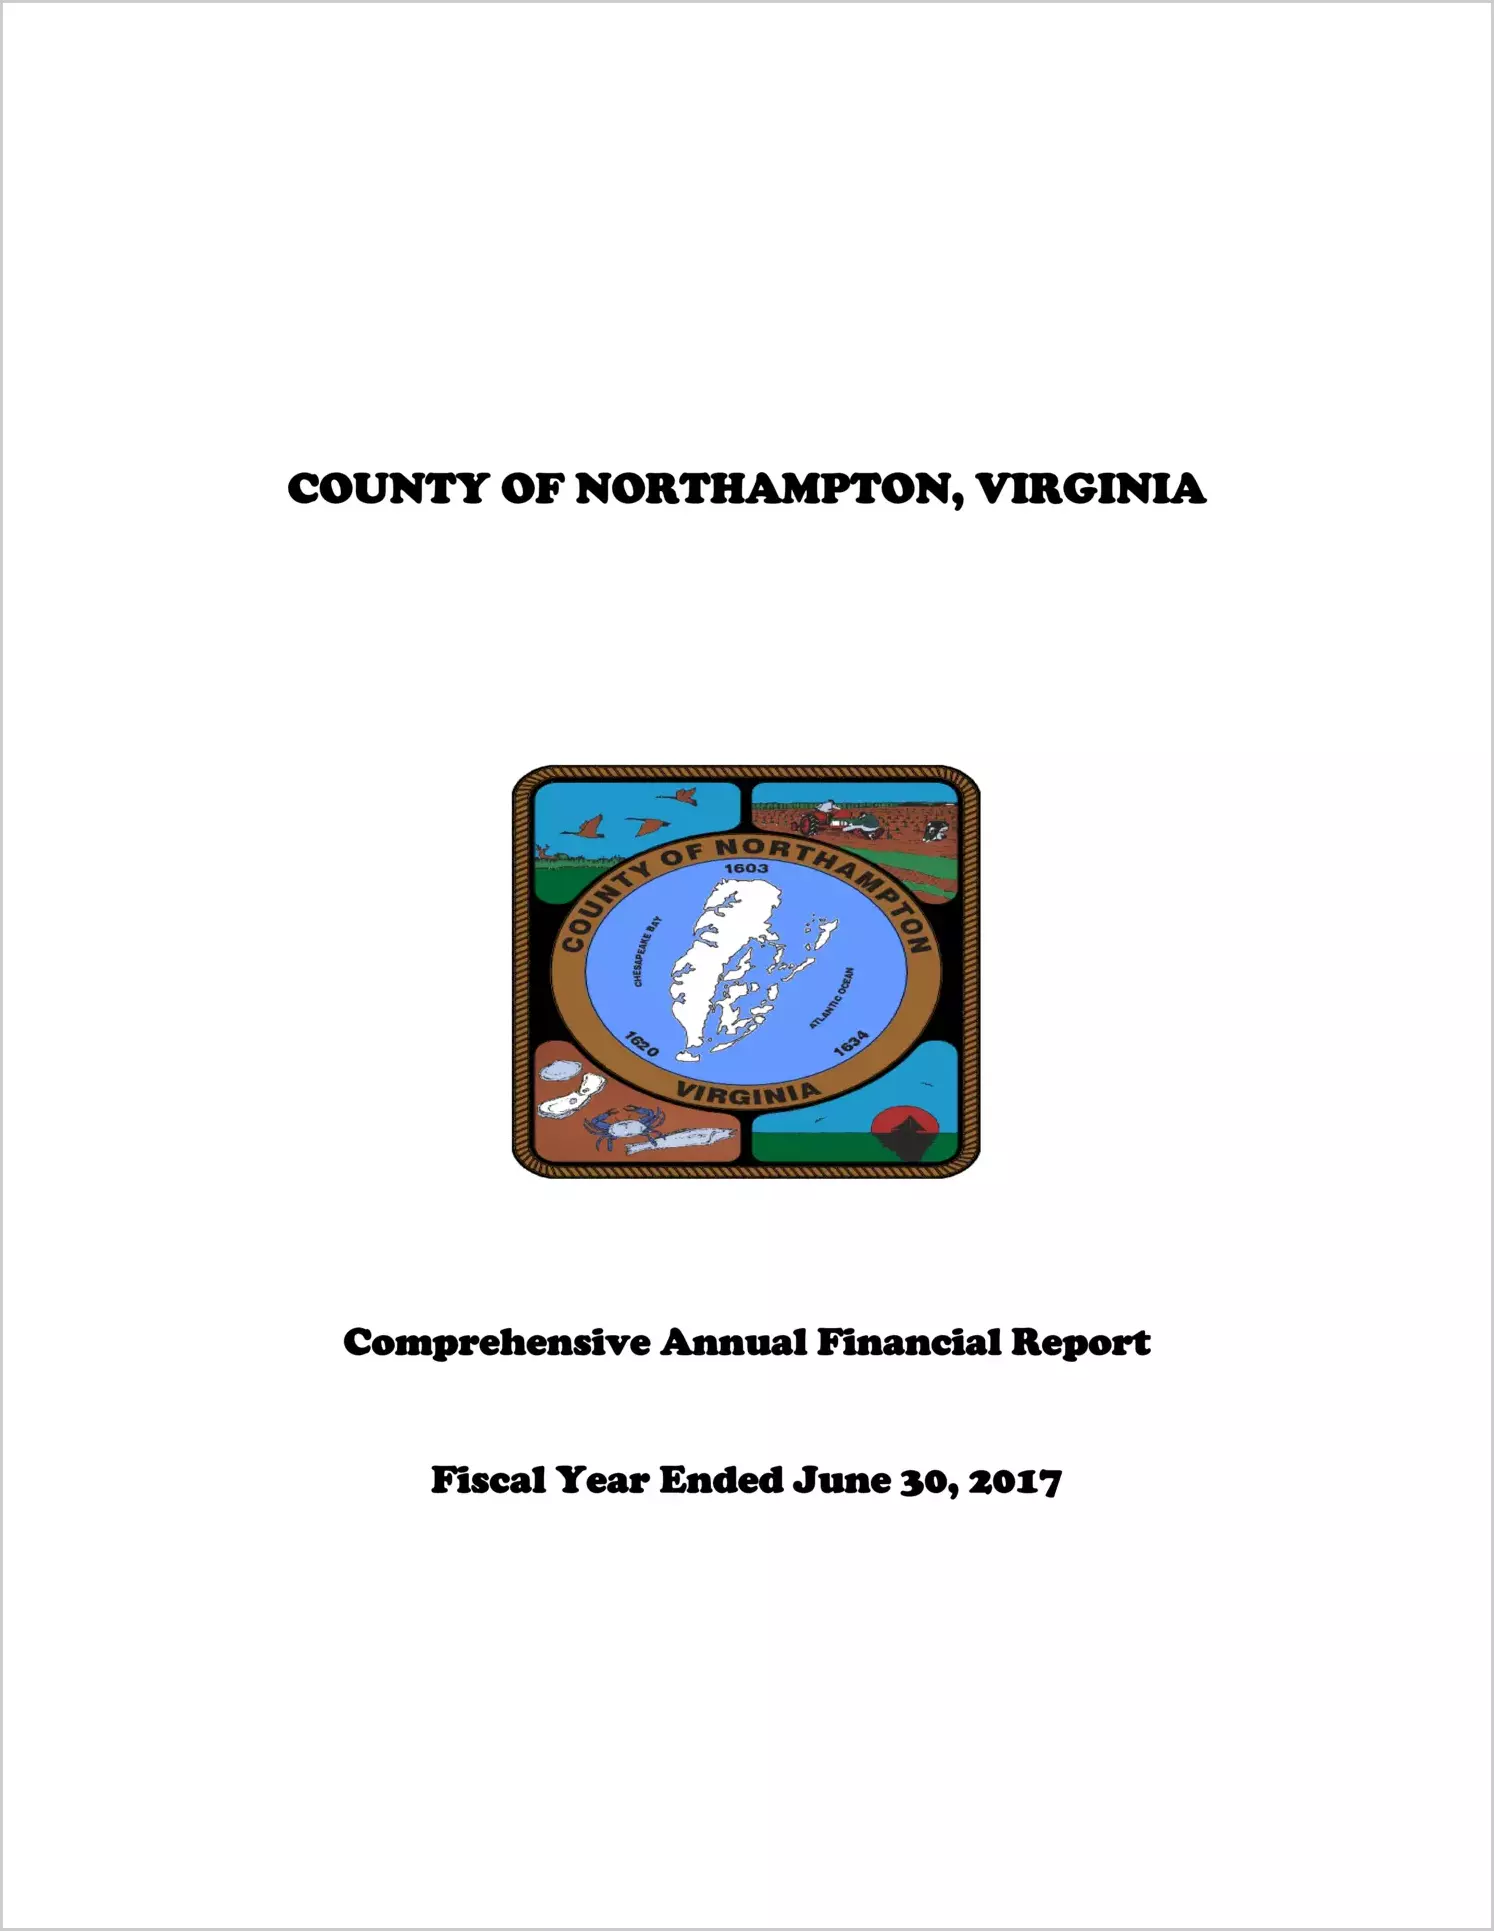 2017 Annual Financial Report for County of Northampton